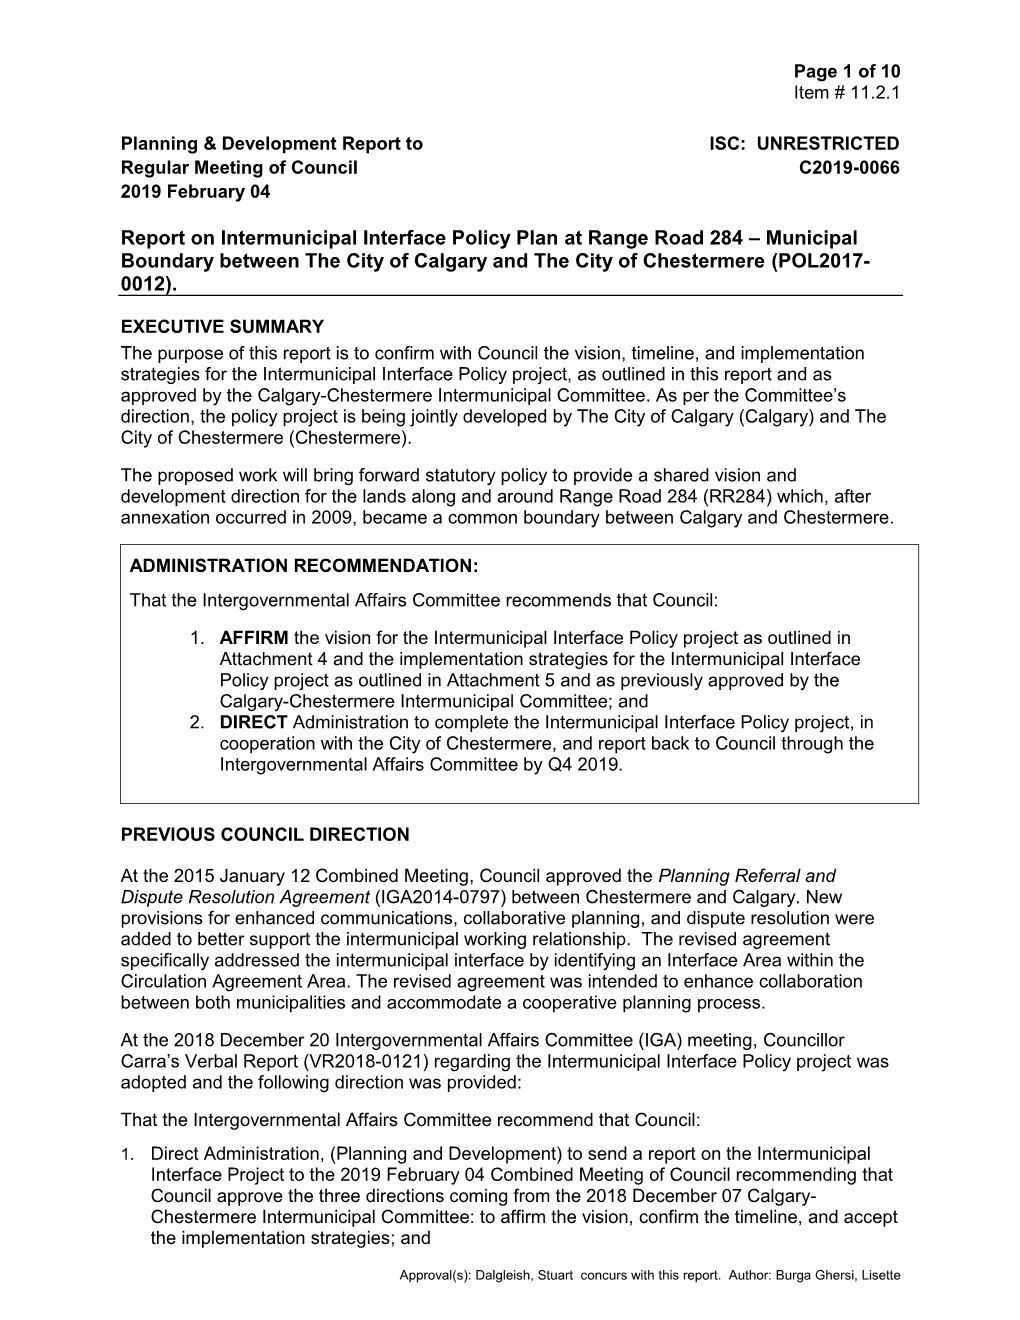 Report on Intermunicipal Interface Policy Plan at Range Road 284 – Municipal Boundary Between the City of Calgary and the City of Chestermere (POL2017- 0012)